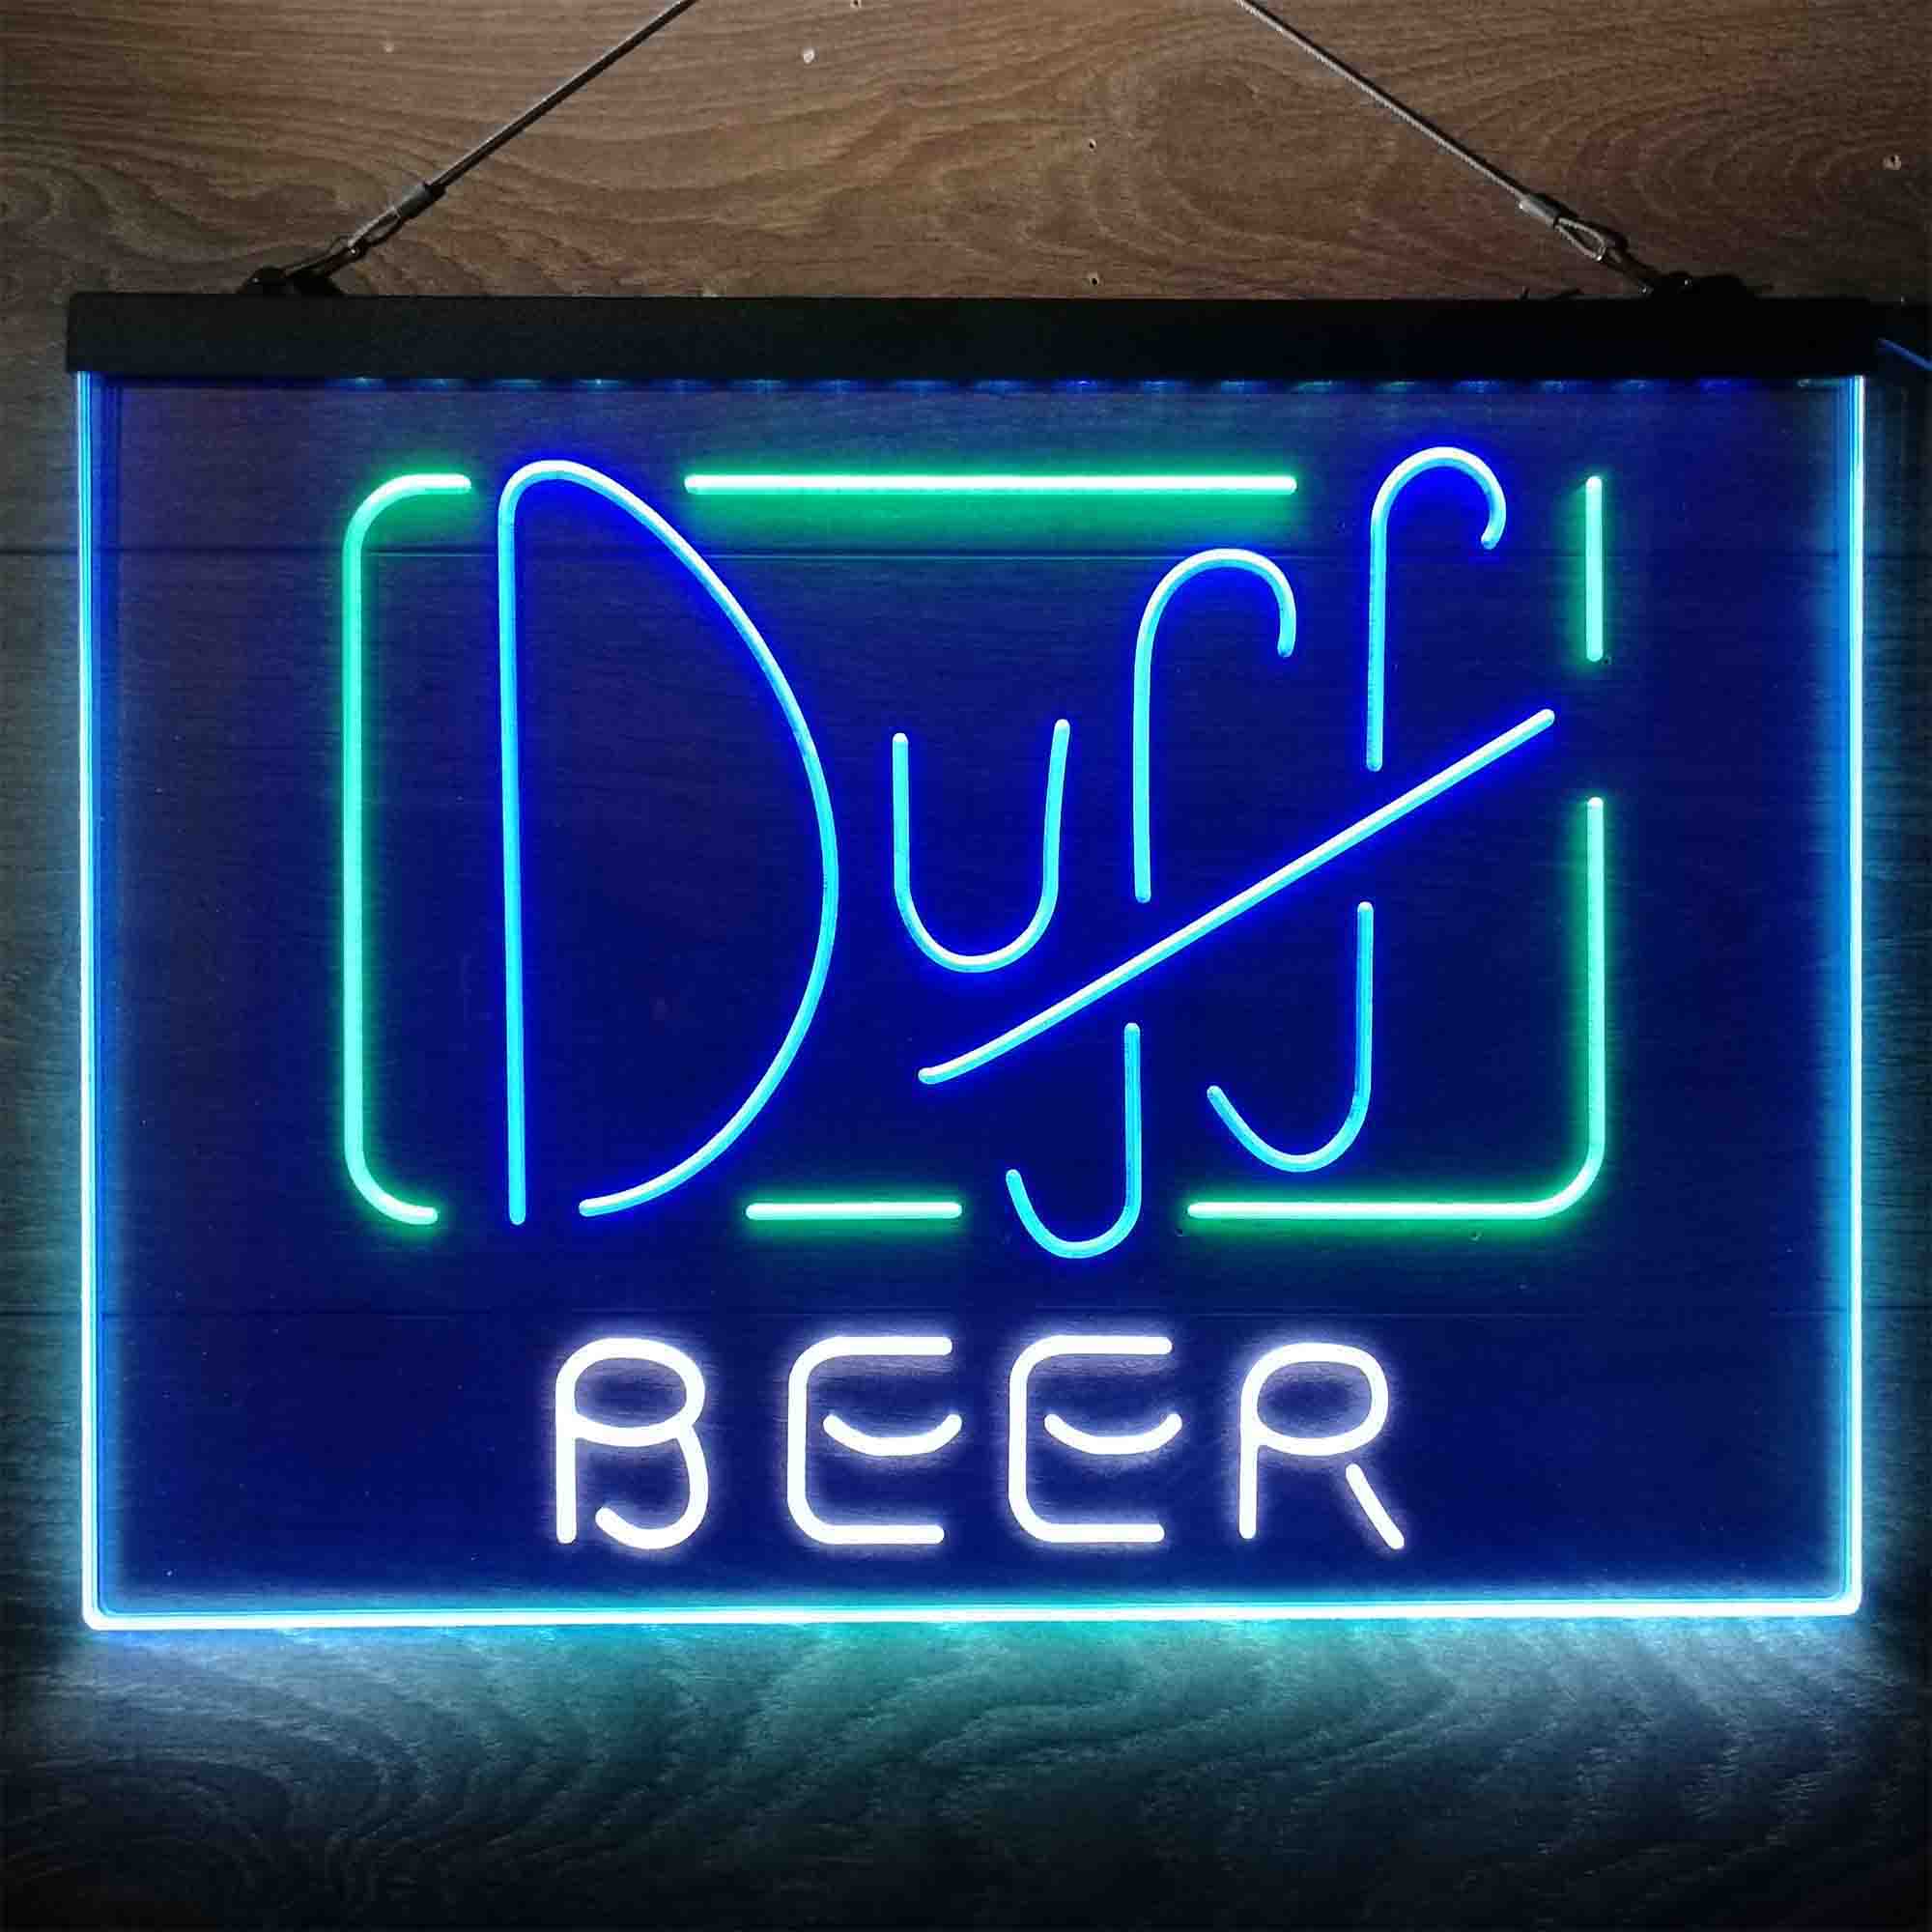 Duff Beer Simpsons Neon LED Sign 3-Colors